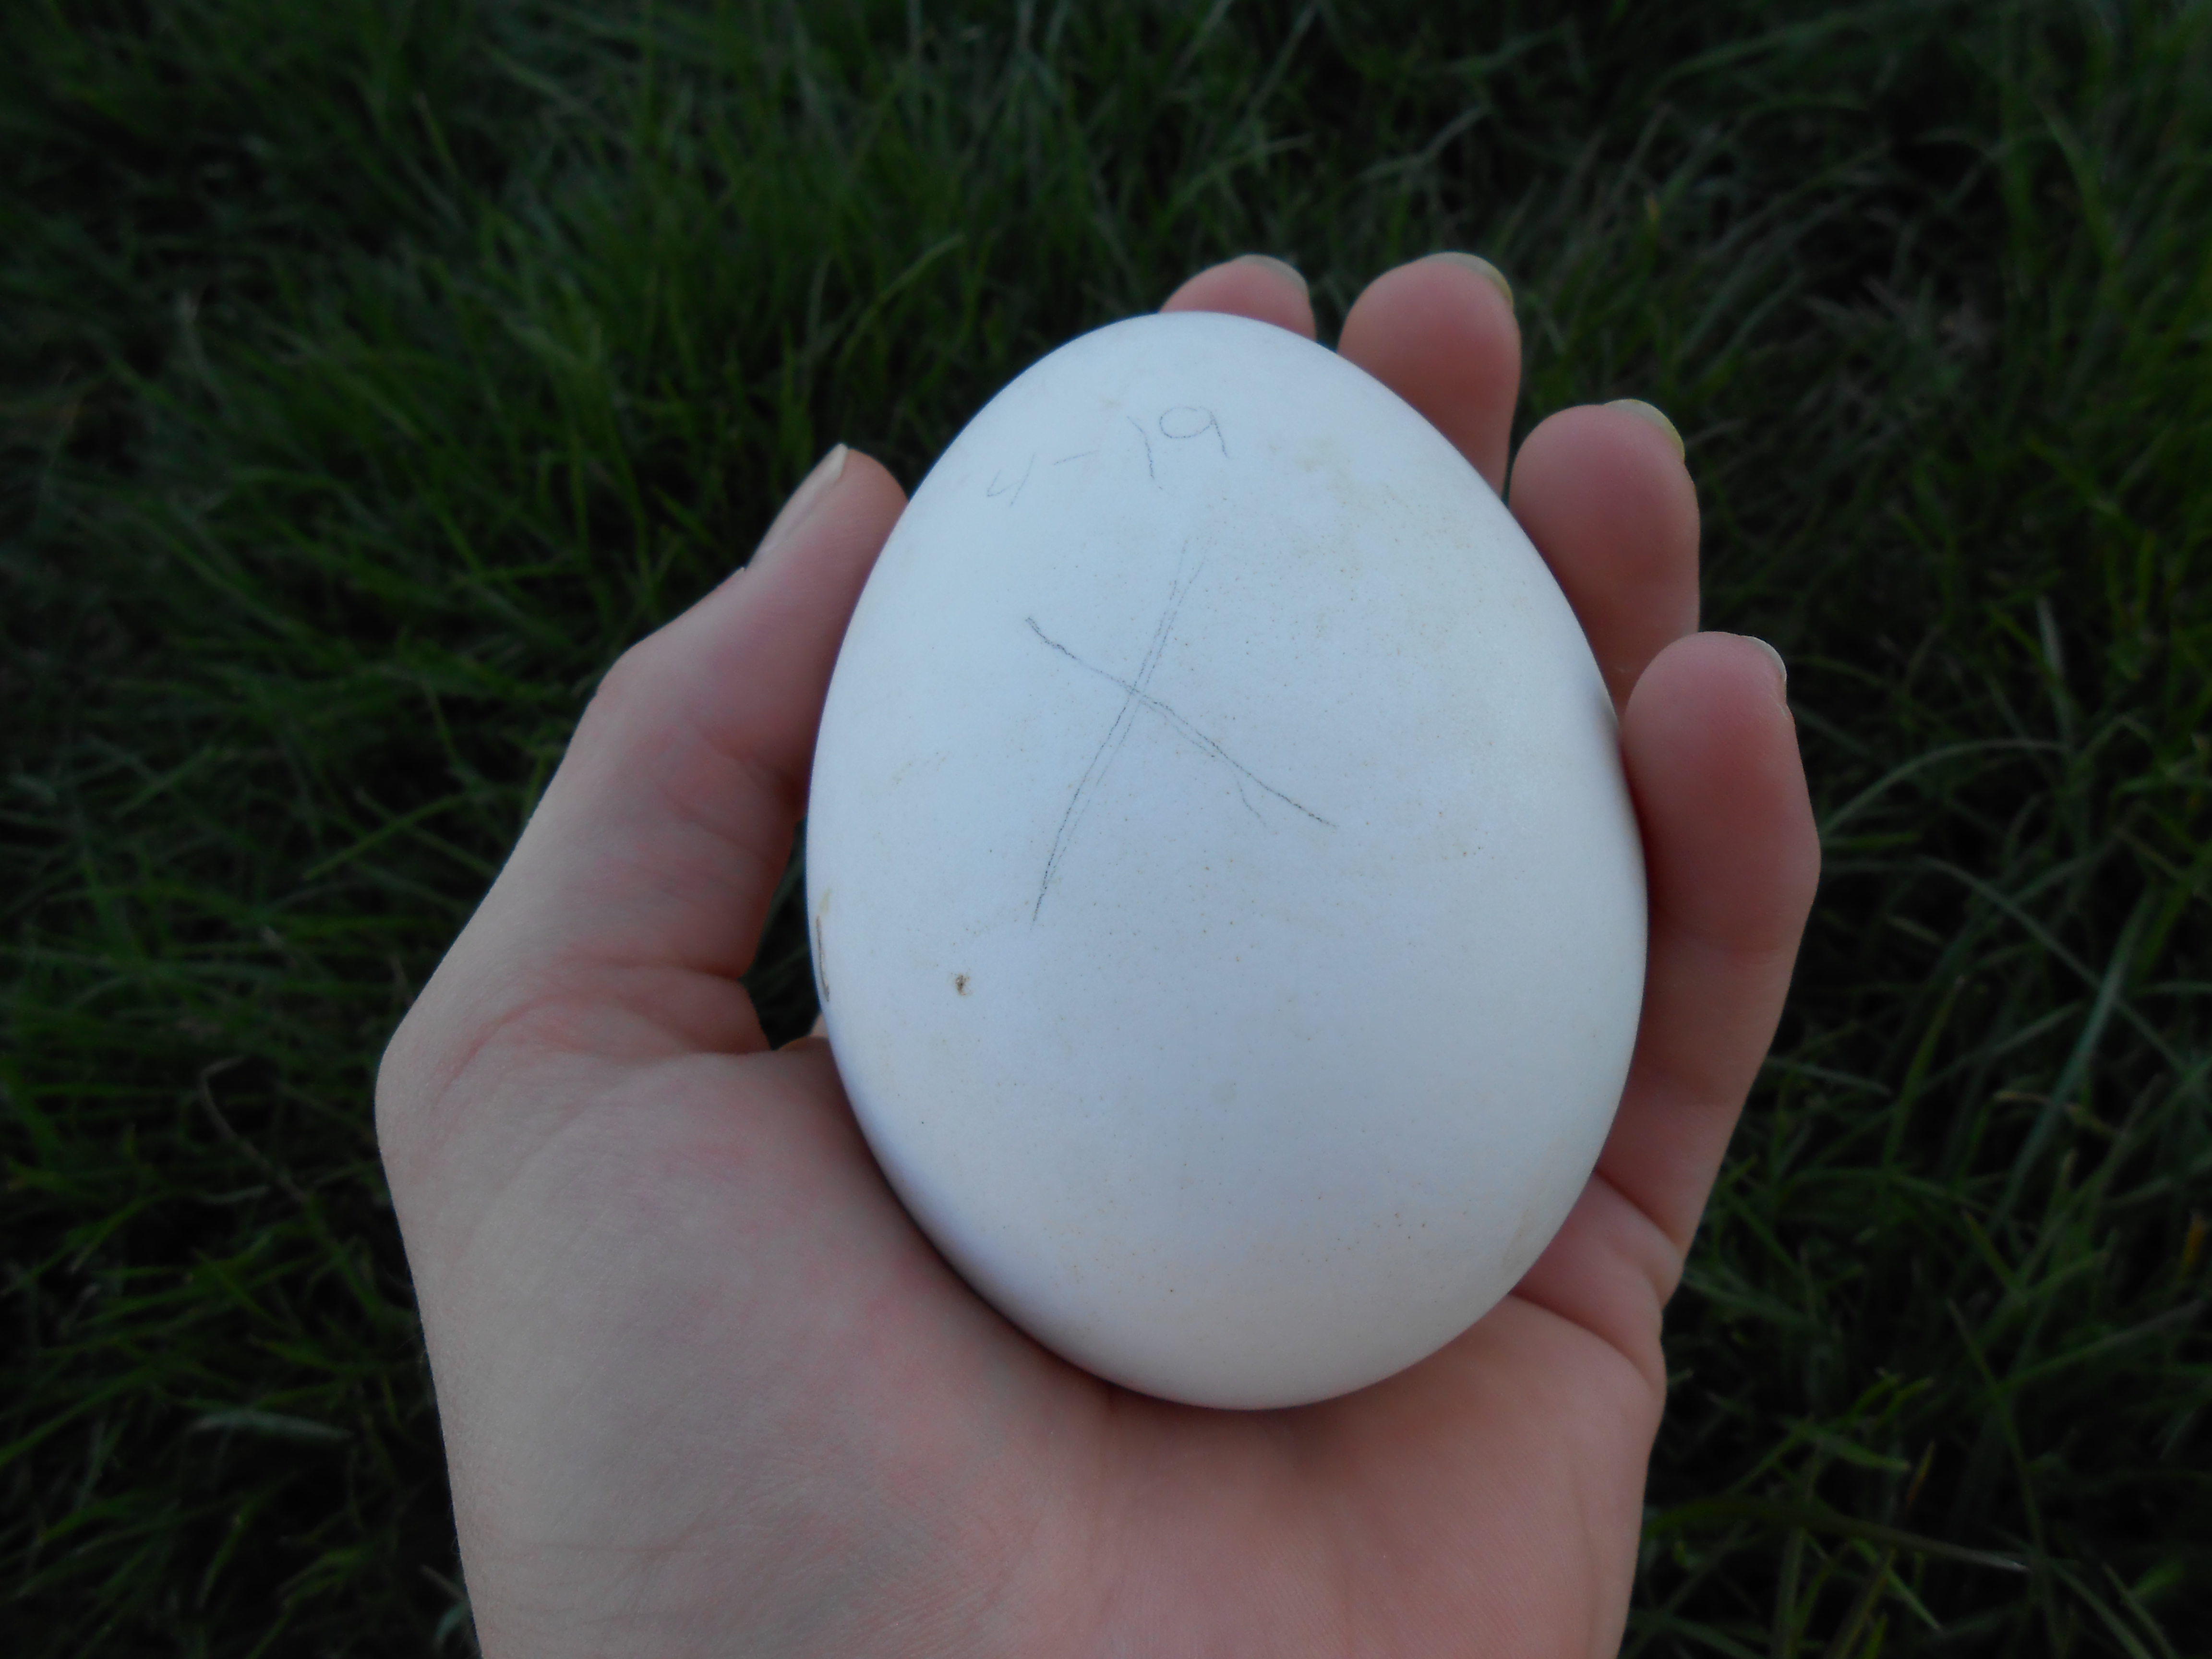 rotten  goose egg discovered by creek